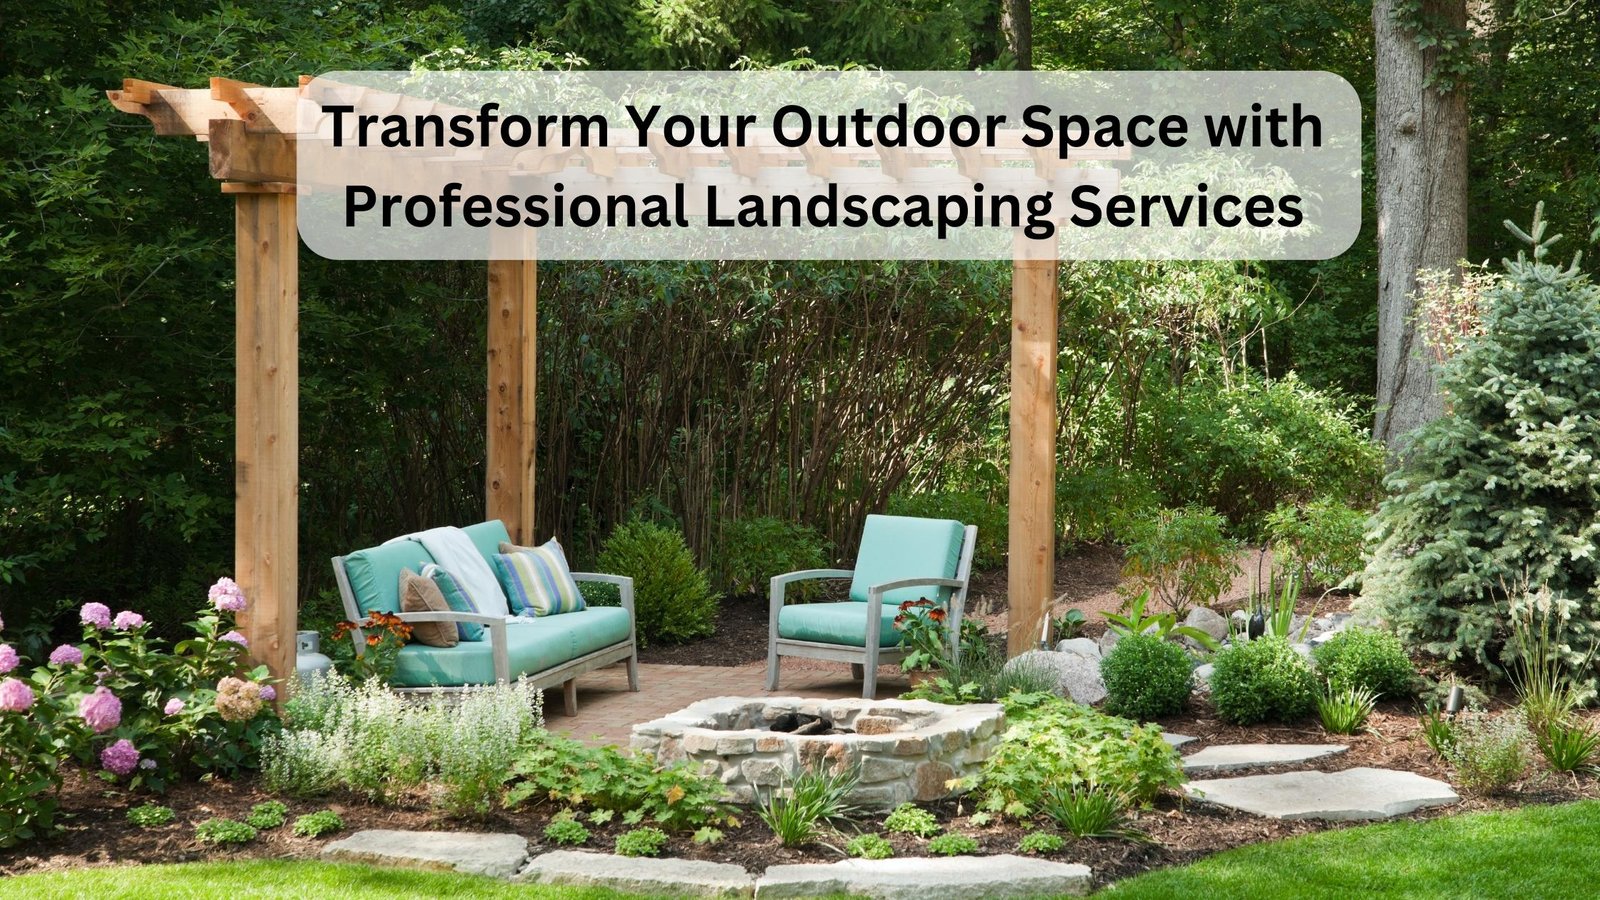 Transform Your Outdoor Space With Professional Landscaping Services